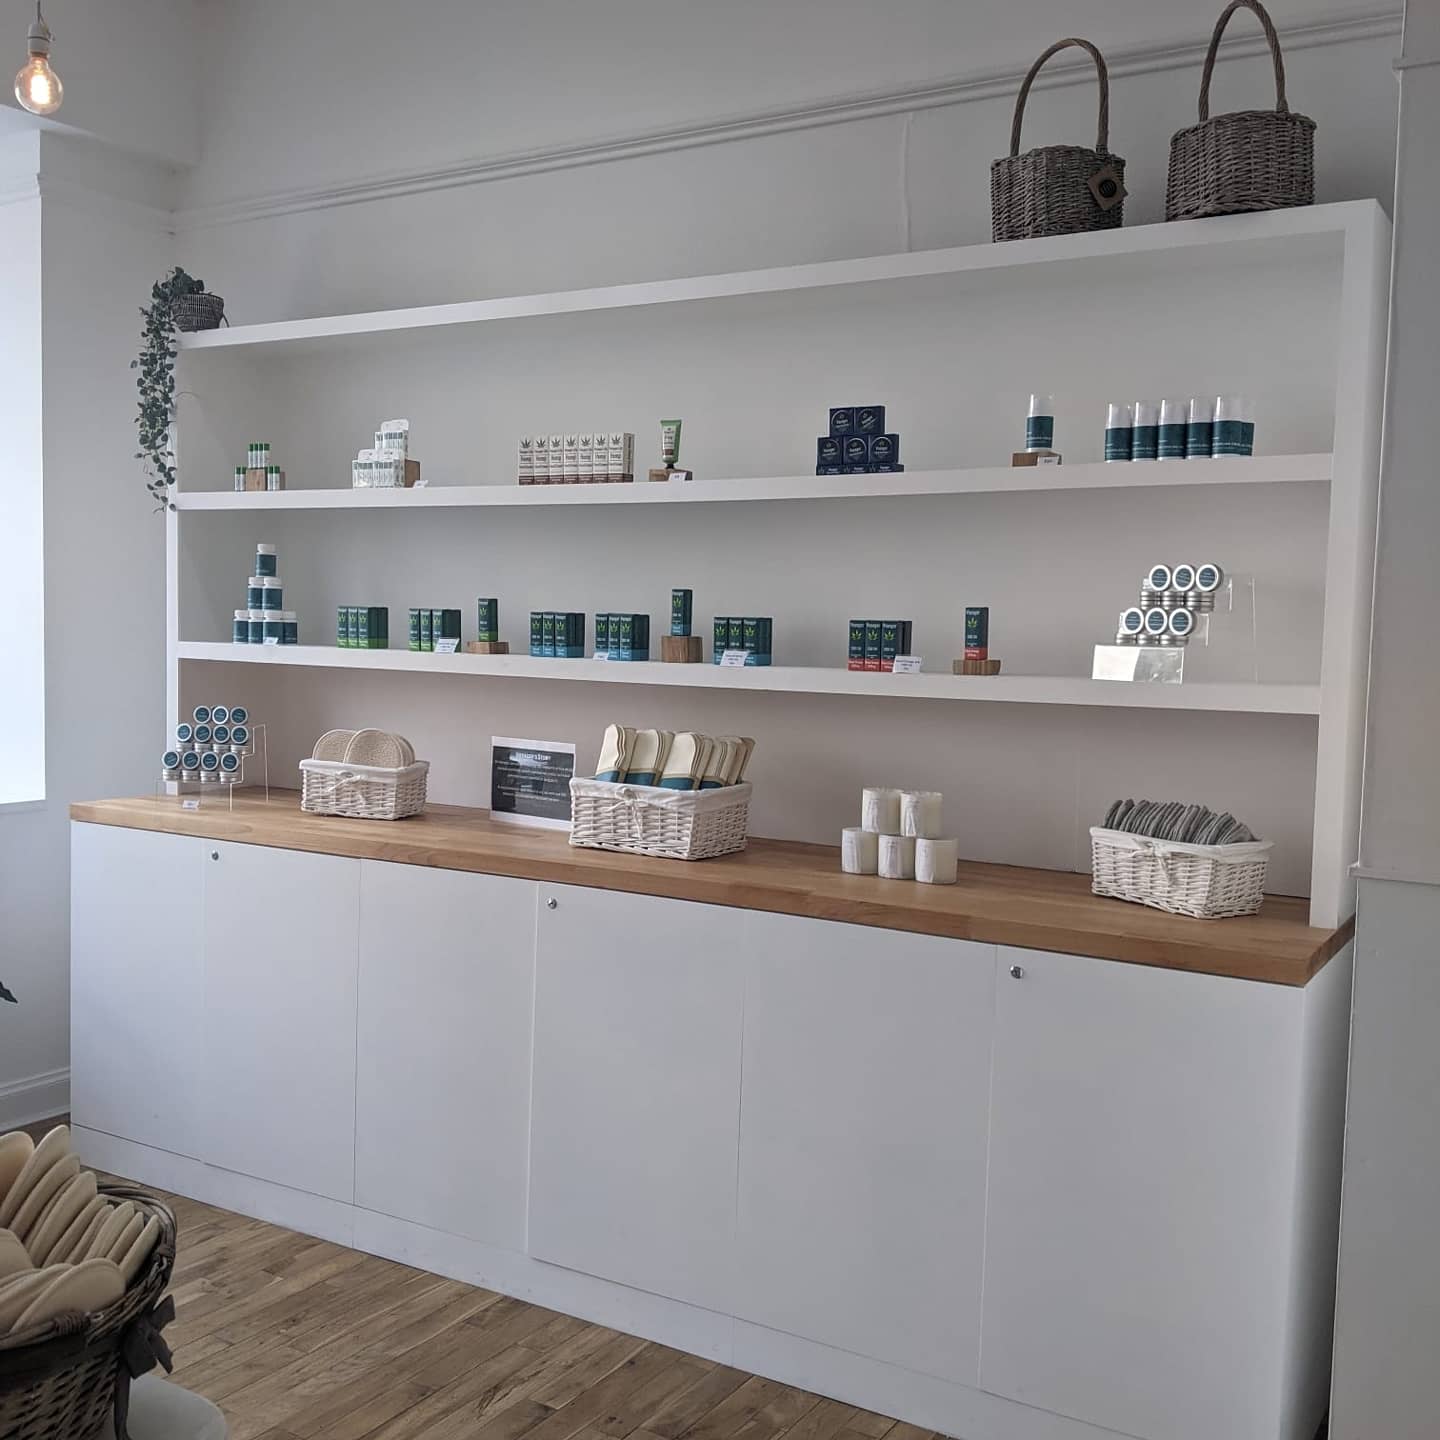 Greenshoots: Scottish CBD firm Voyager opens first retail store in St Andrews